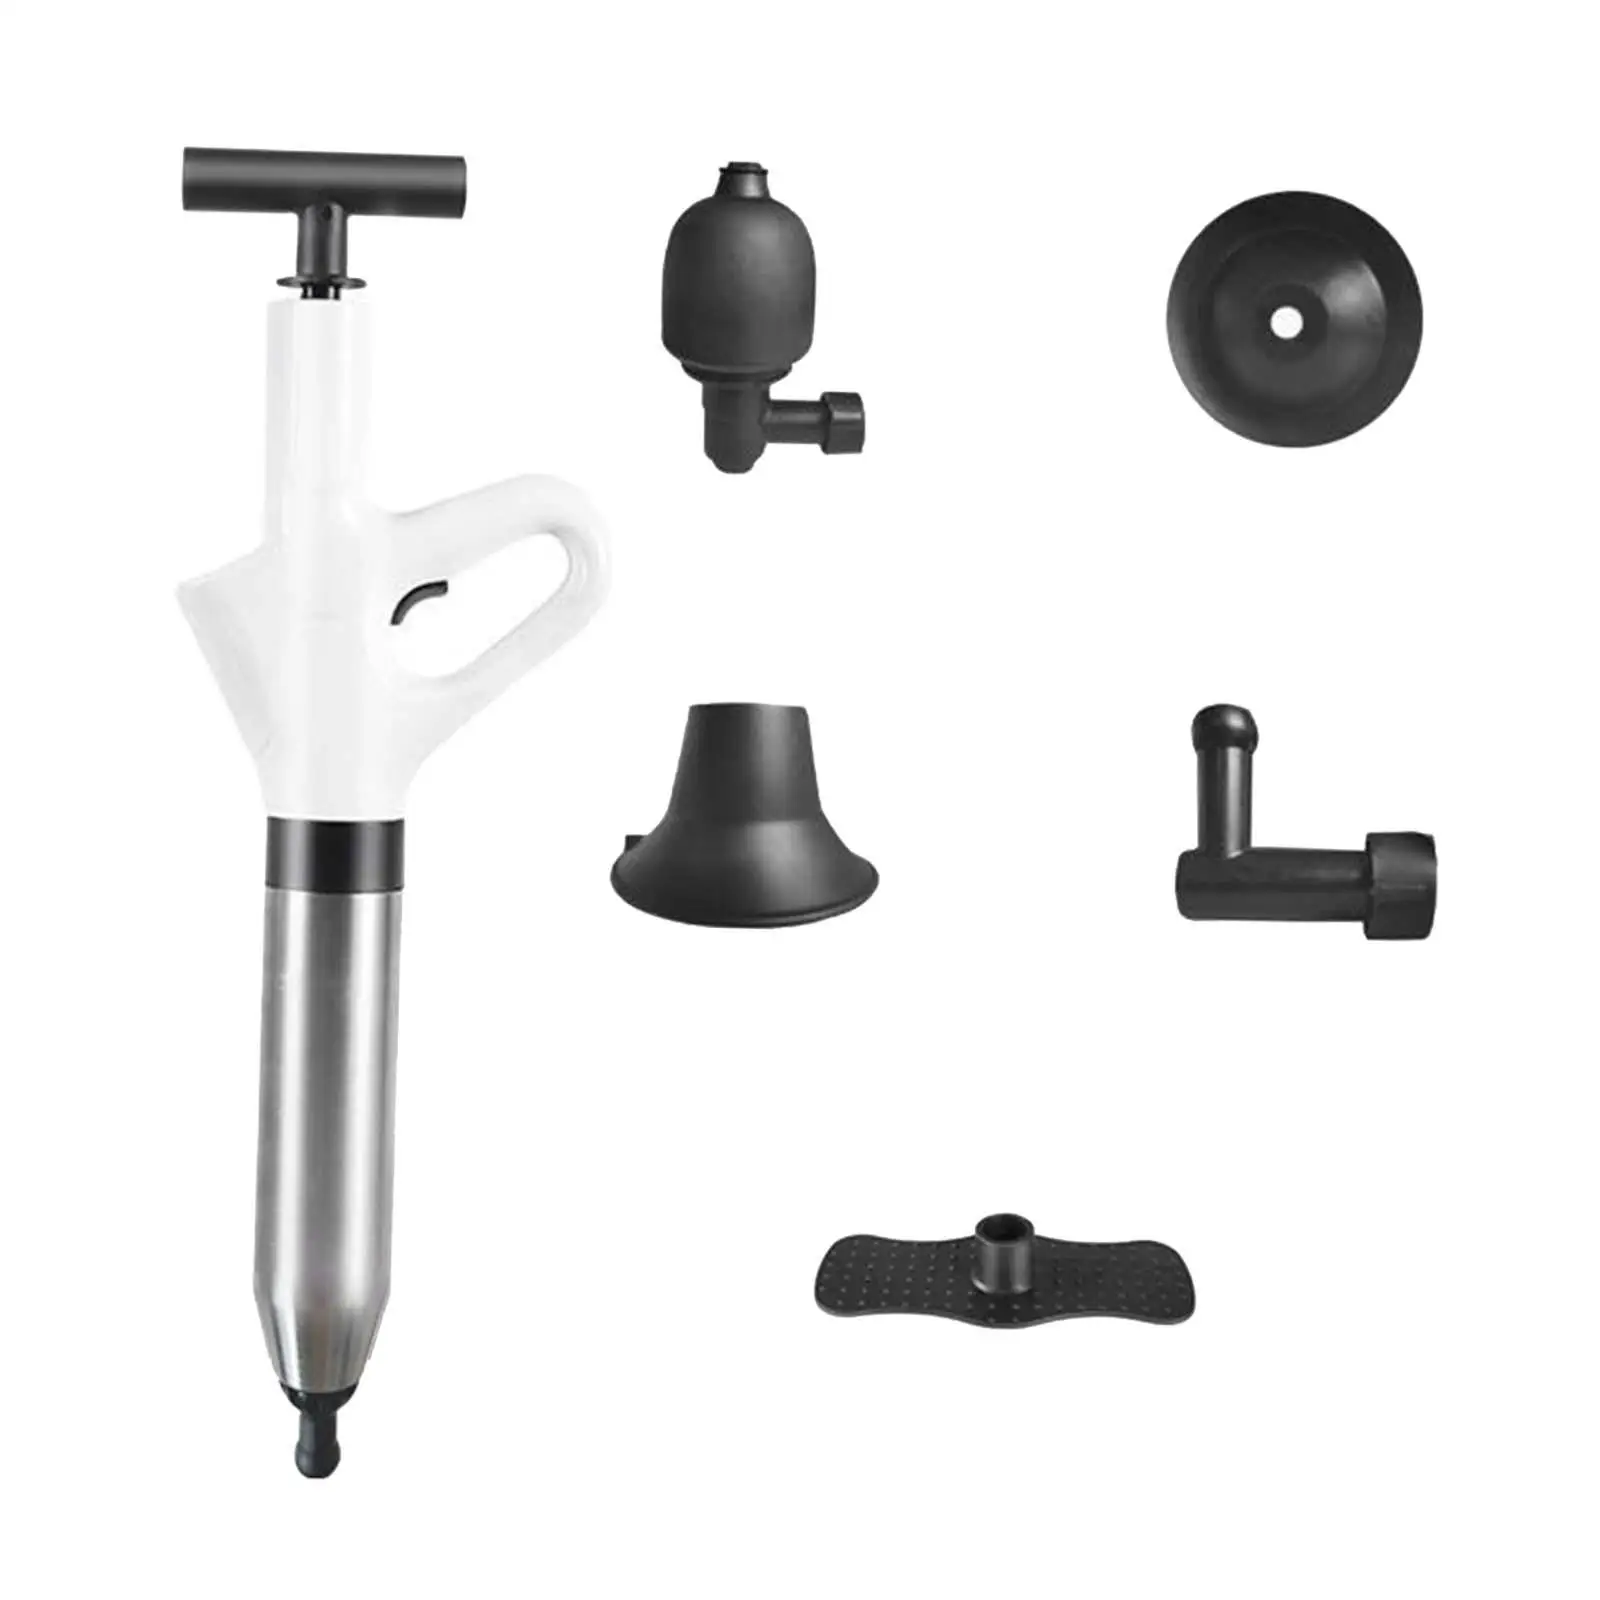 Toilet Air Pressure Plunger Pump with Interchangeable Plunger Heads High Pressure Air Drain Pipe Plunger for Sinks Washbasin